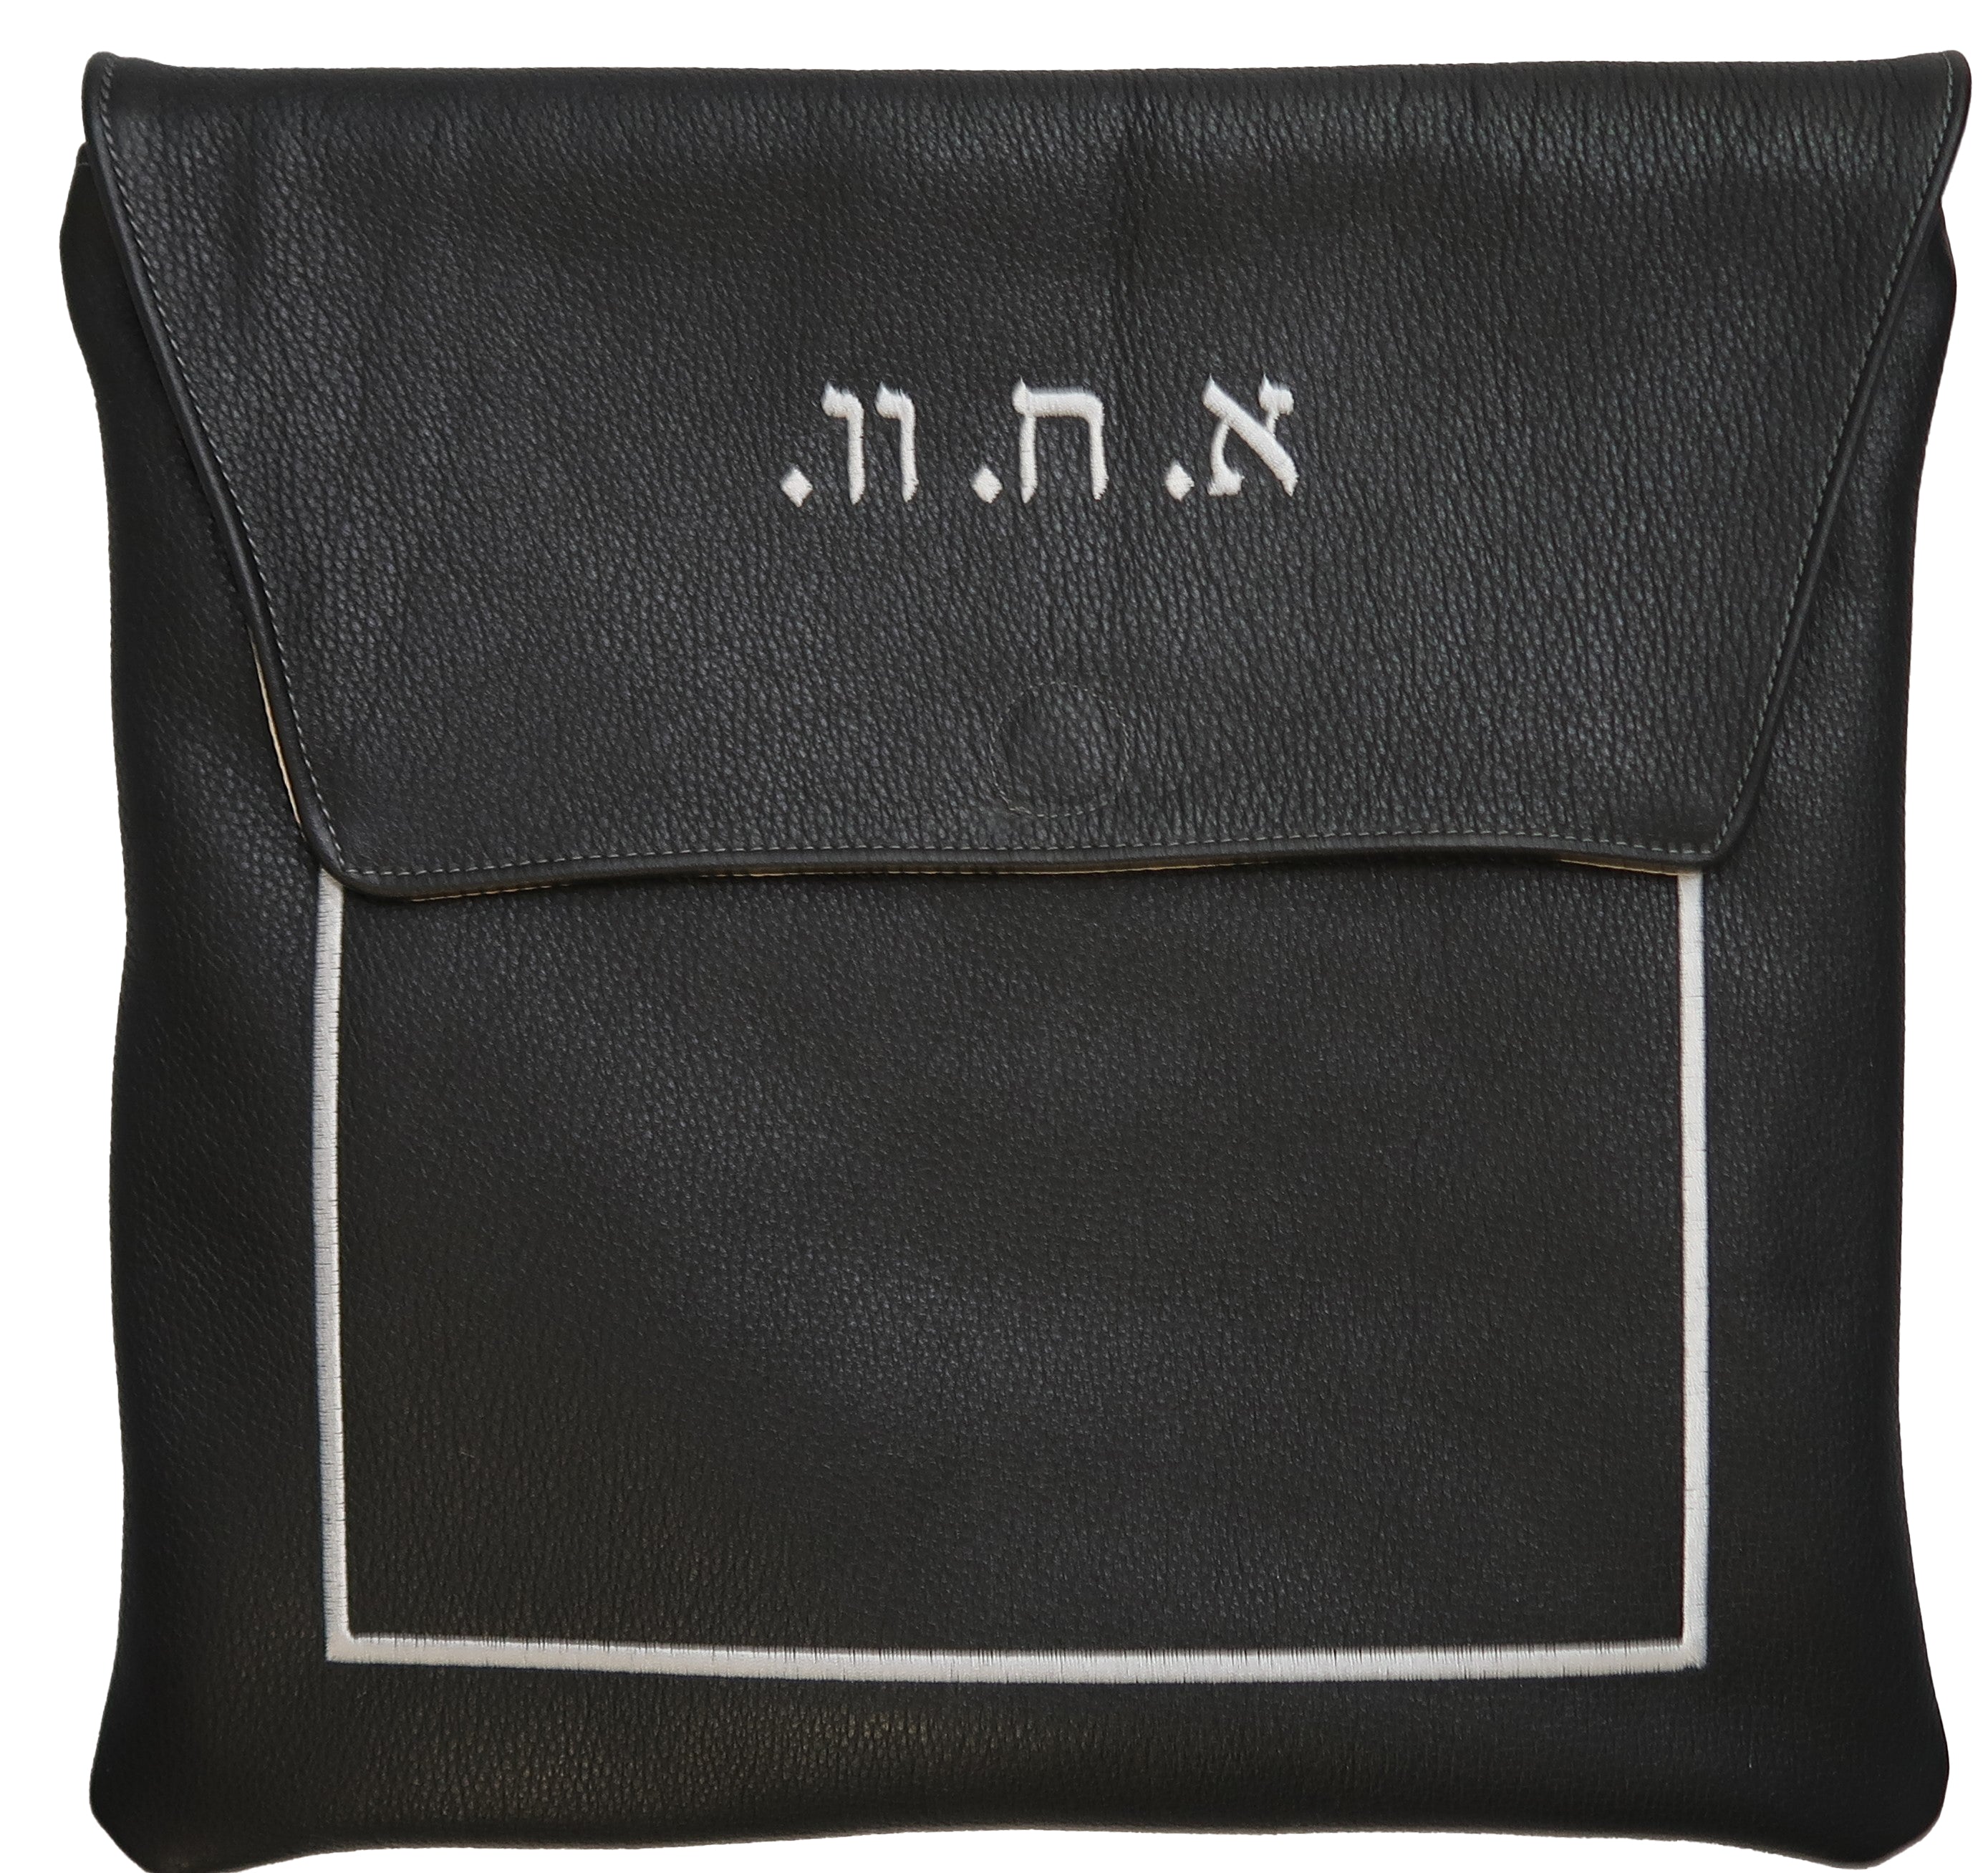 Classic leather square shape border design with leather flap